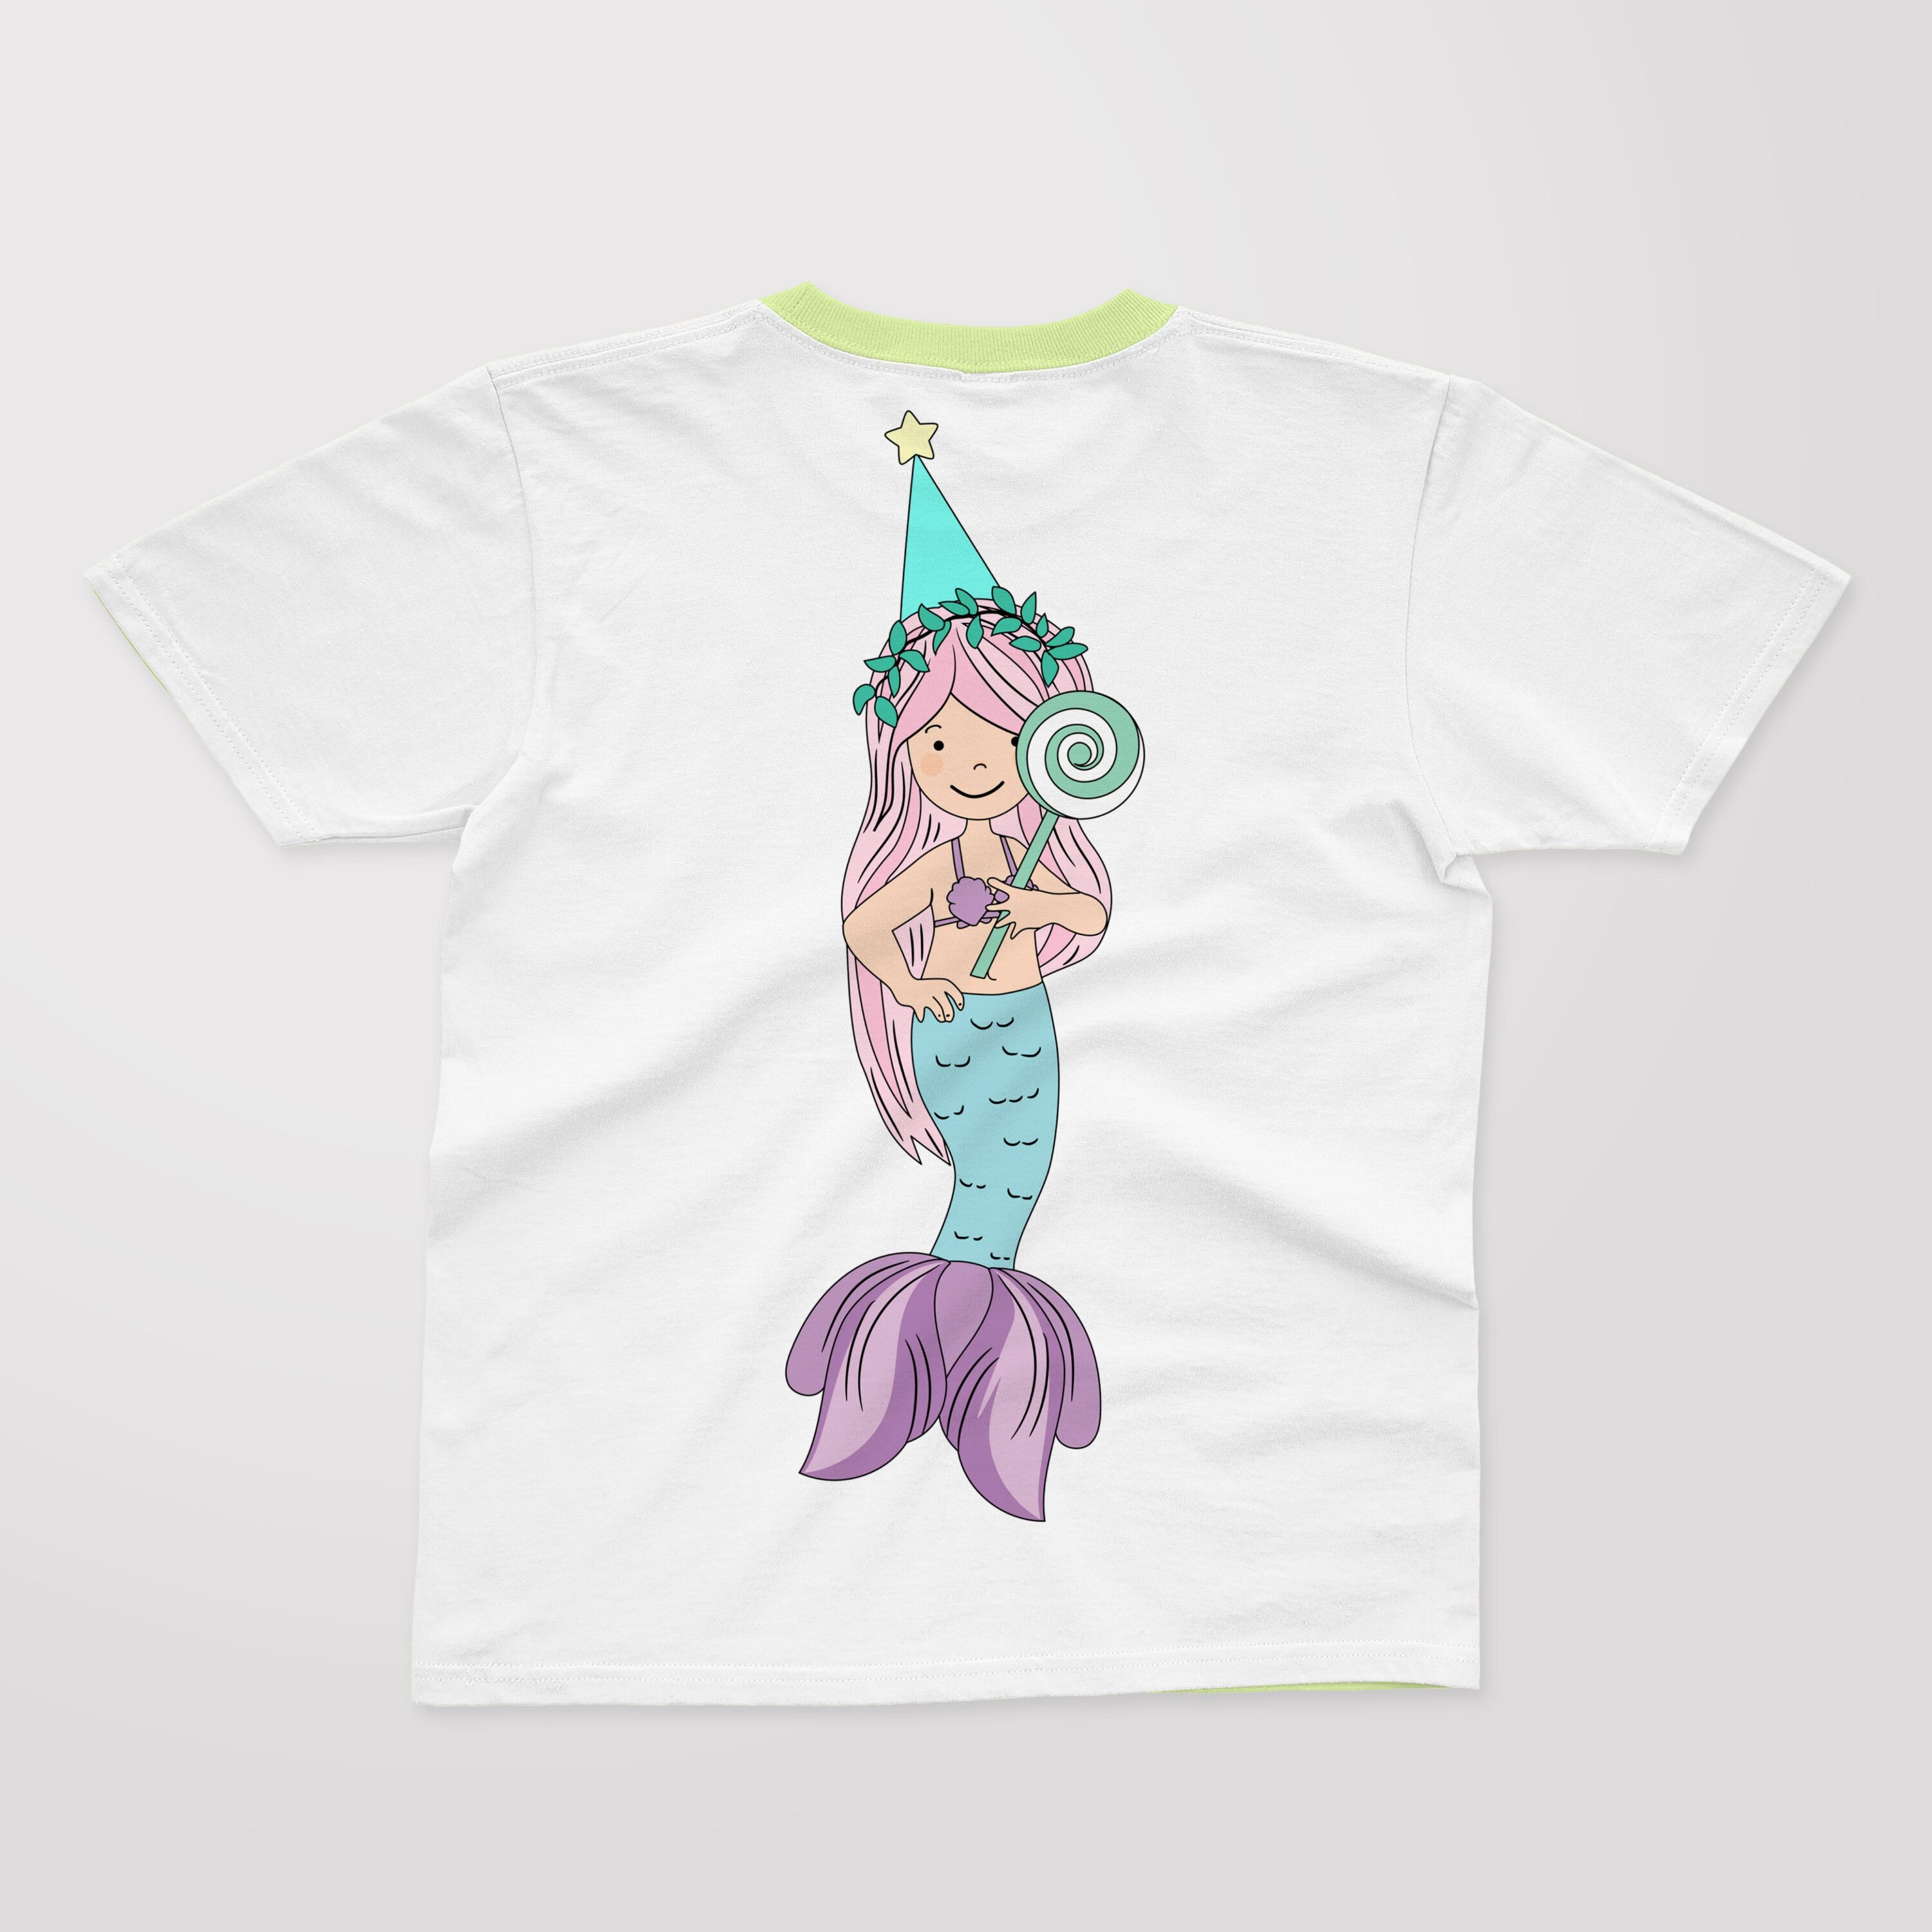 Cute pink hair mermaid with the sweets.